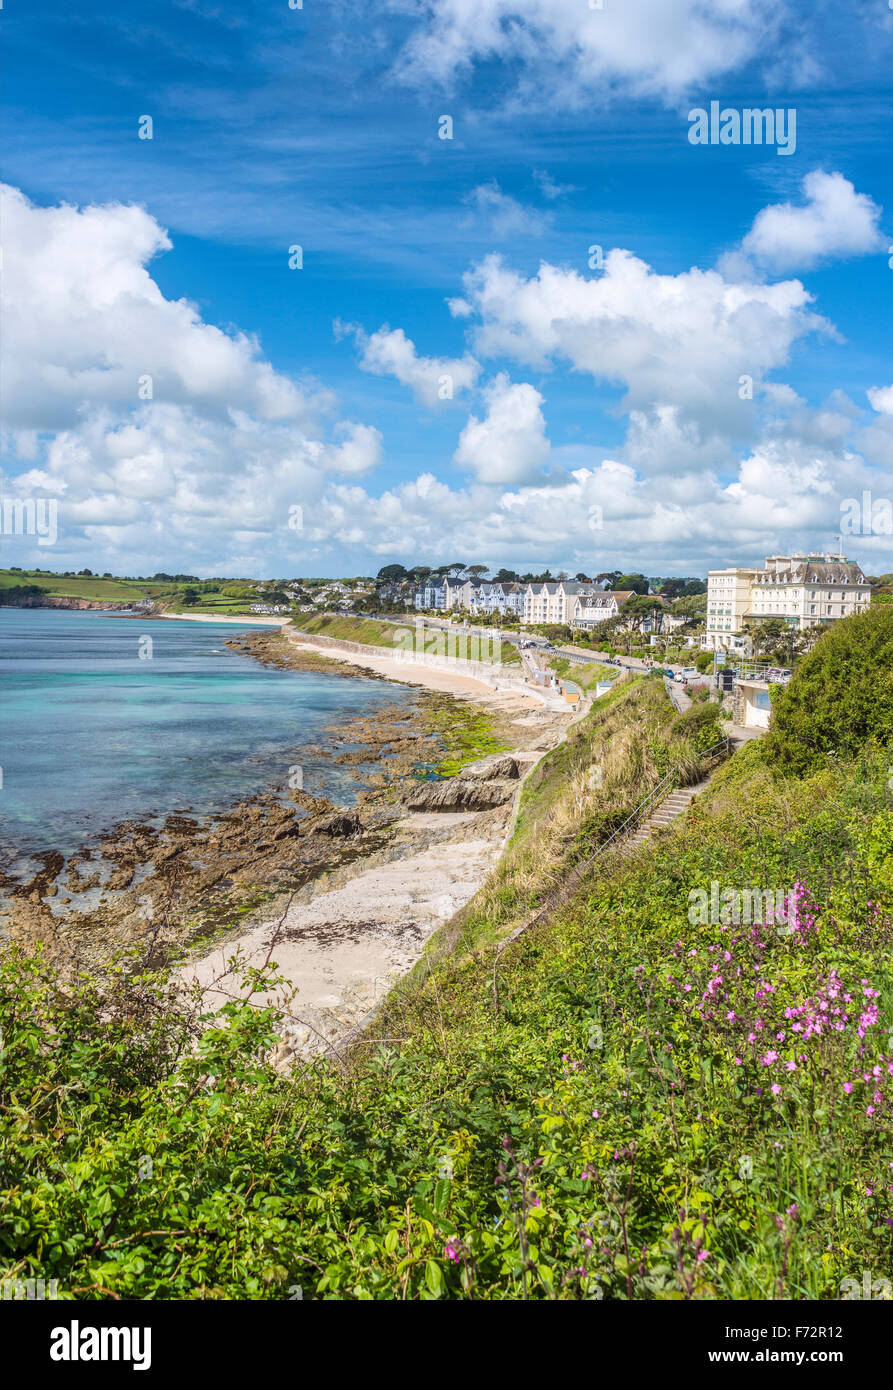 Falmouth Cornwall High Resolution Images - Alamy